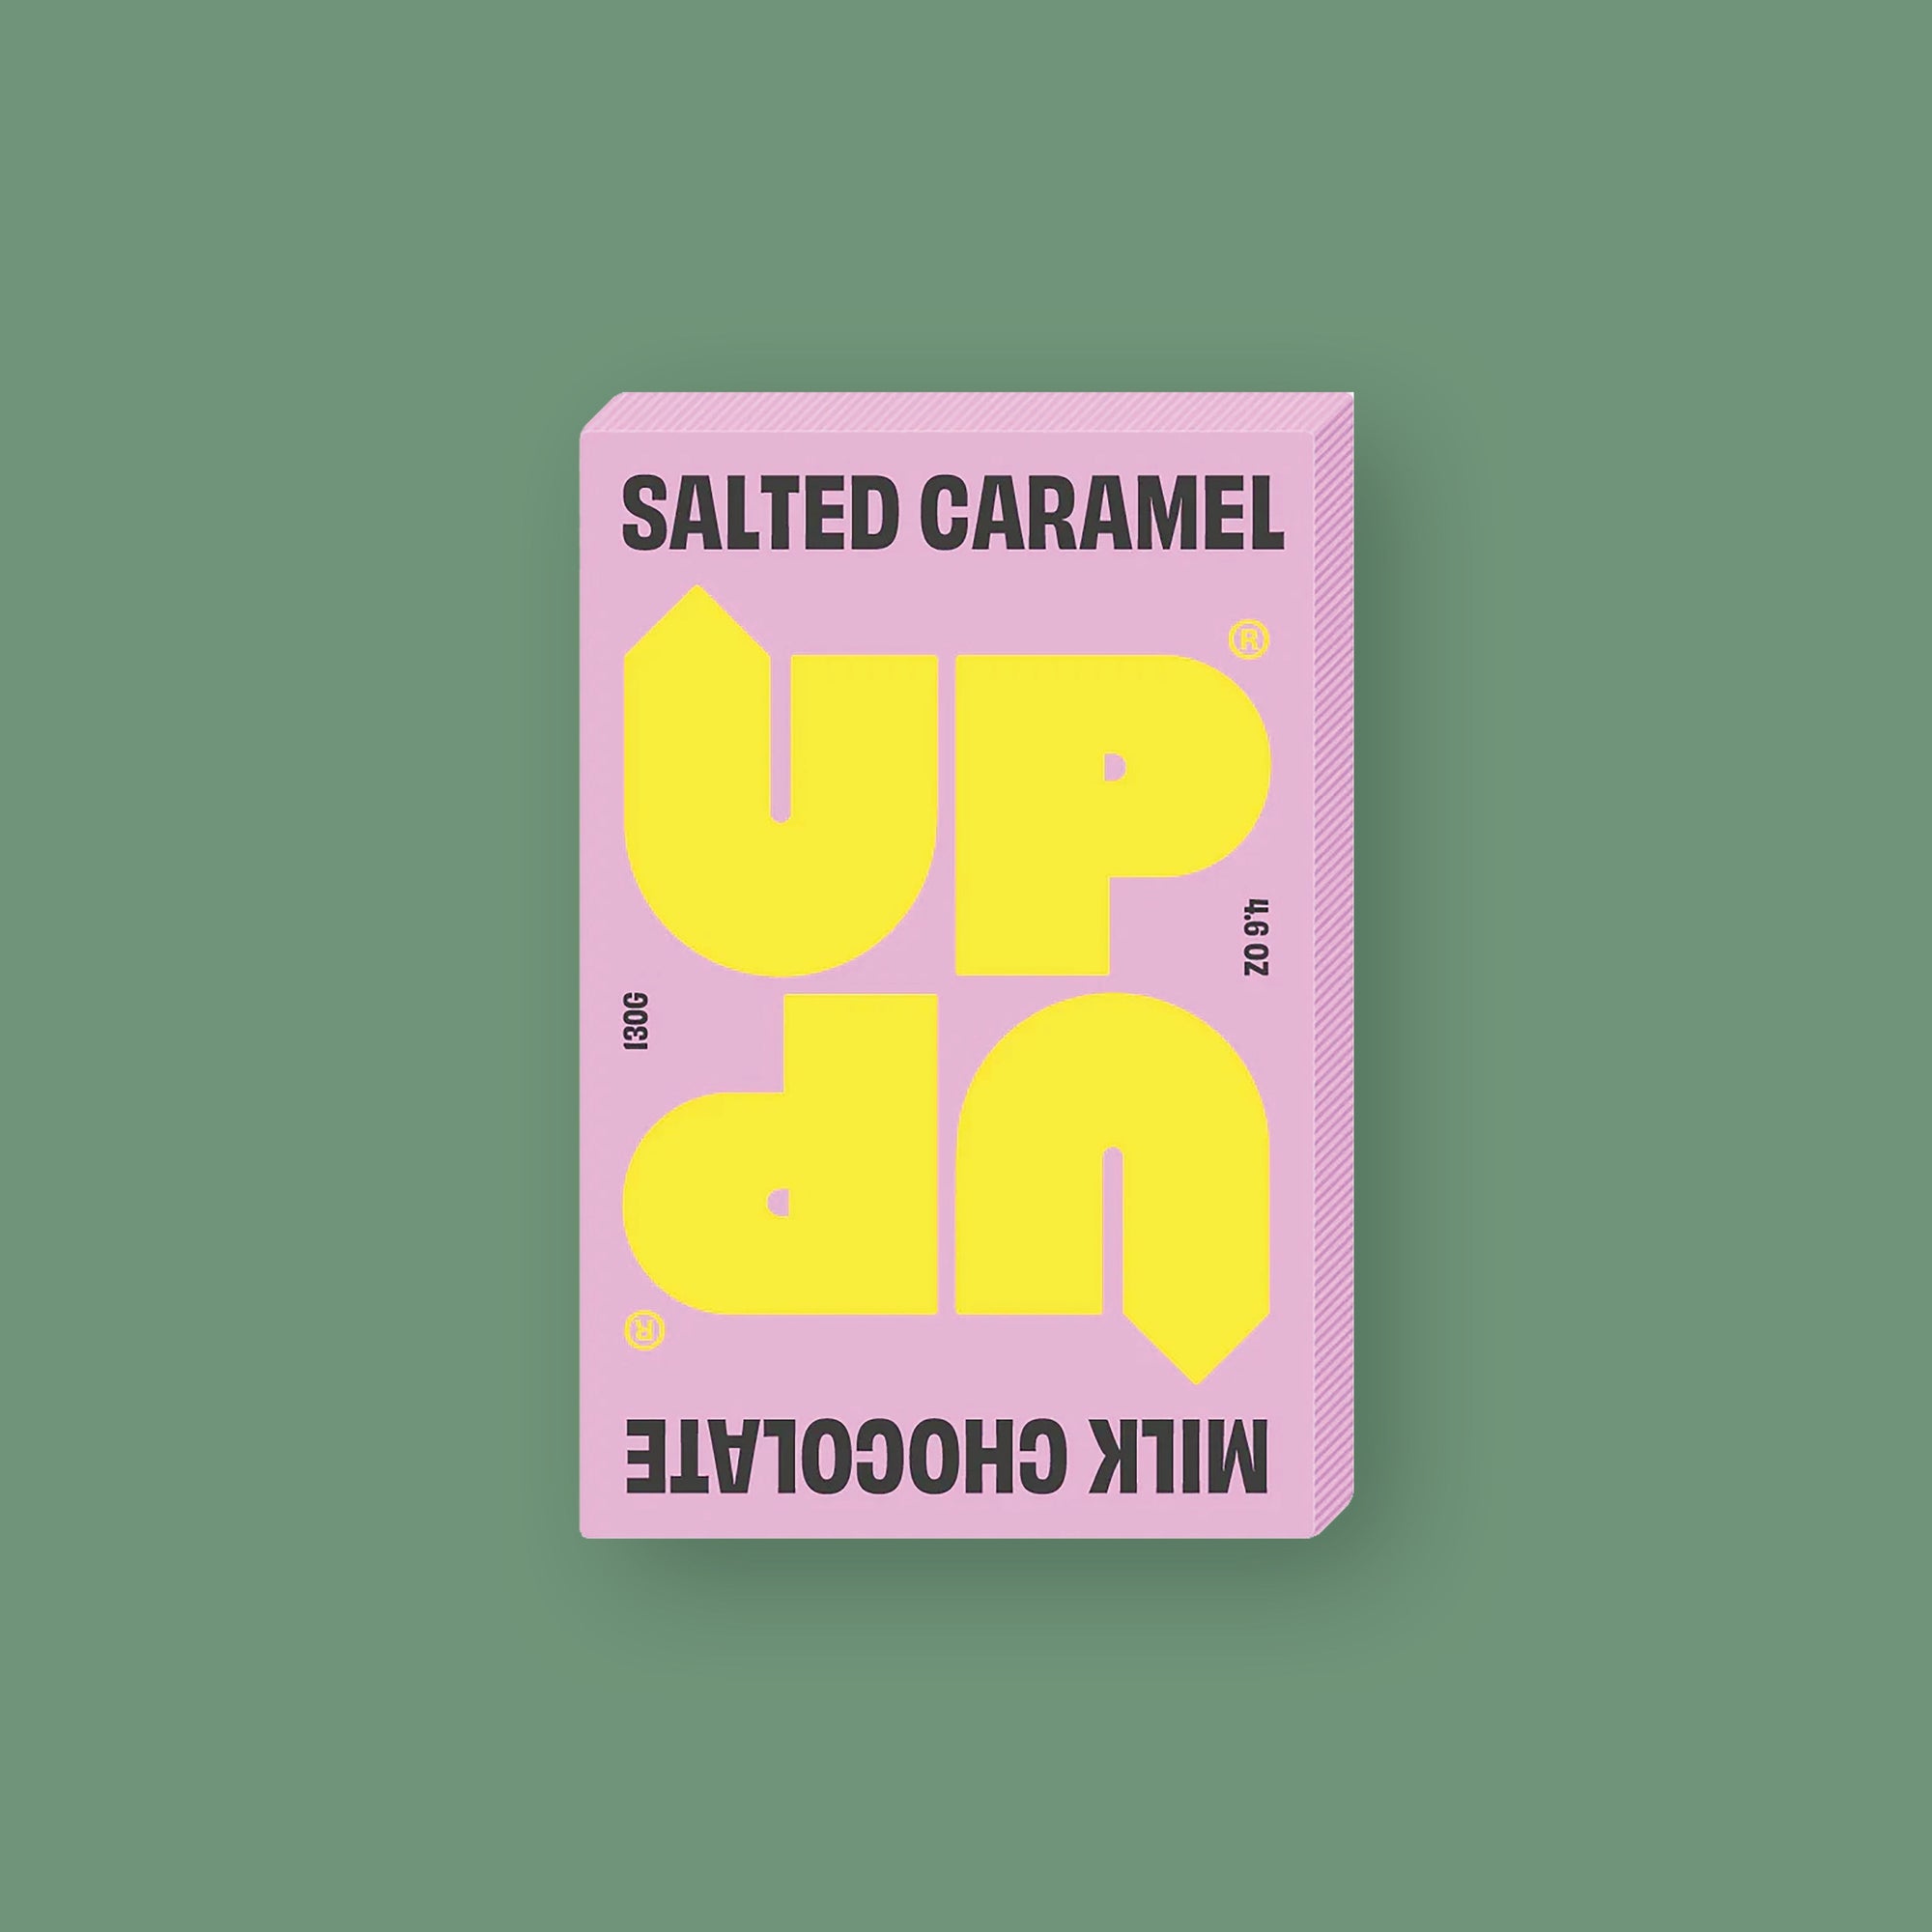 On a mossy green background sits a box of UP UP Salted Caramel Chocolate. The packaging is in light pink and yellow. 130G 4.6 OZ